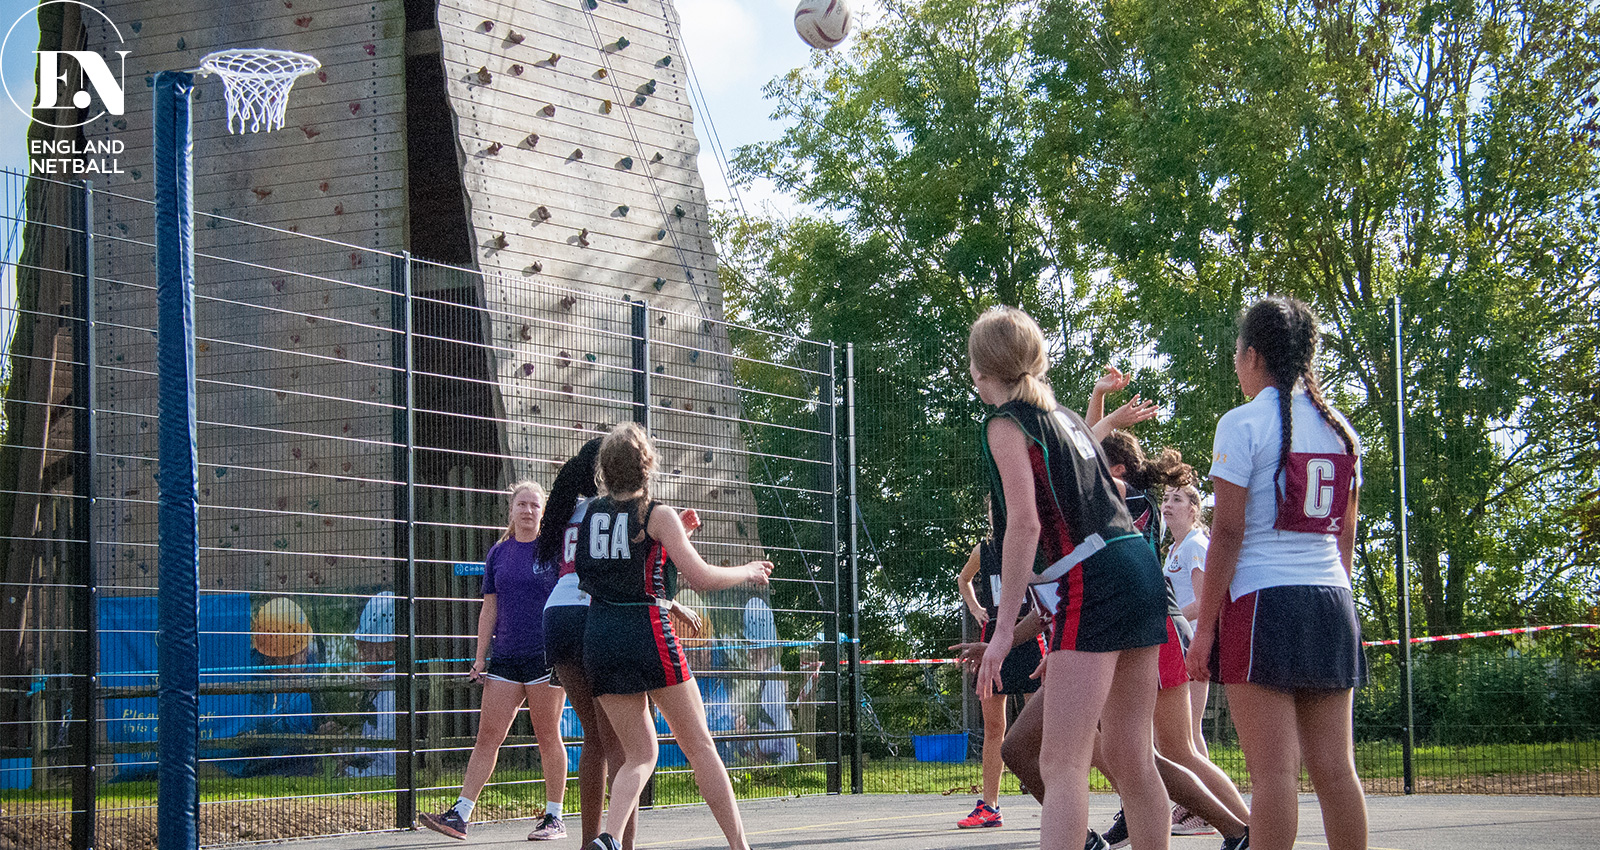 Netball Tournaments for Years 7-11